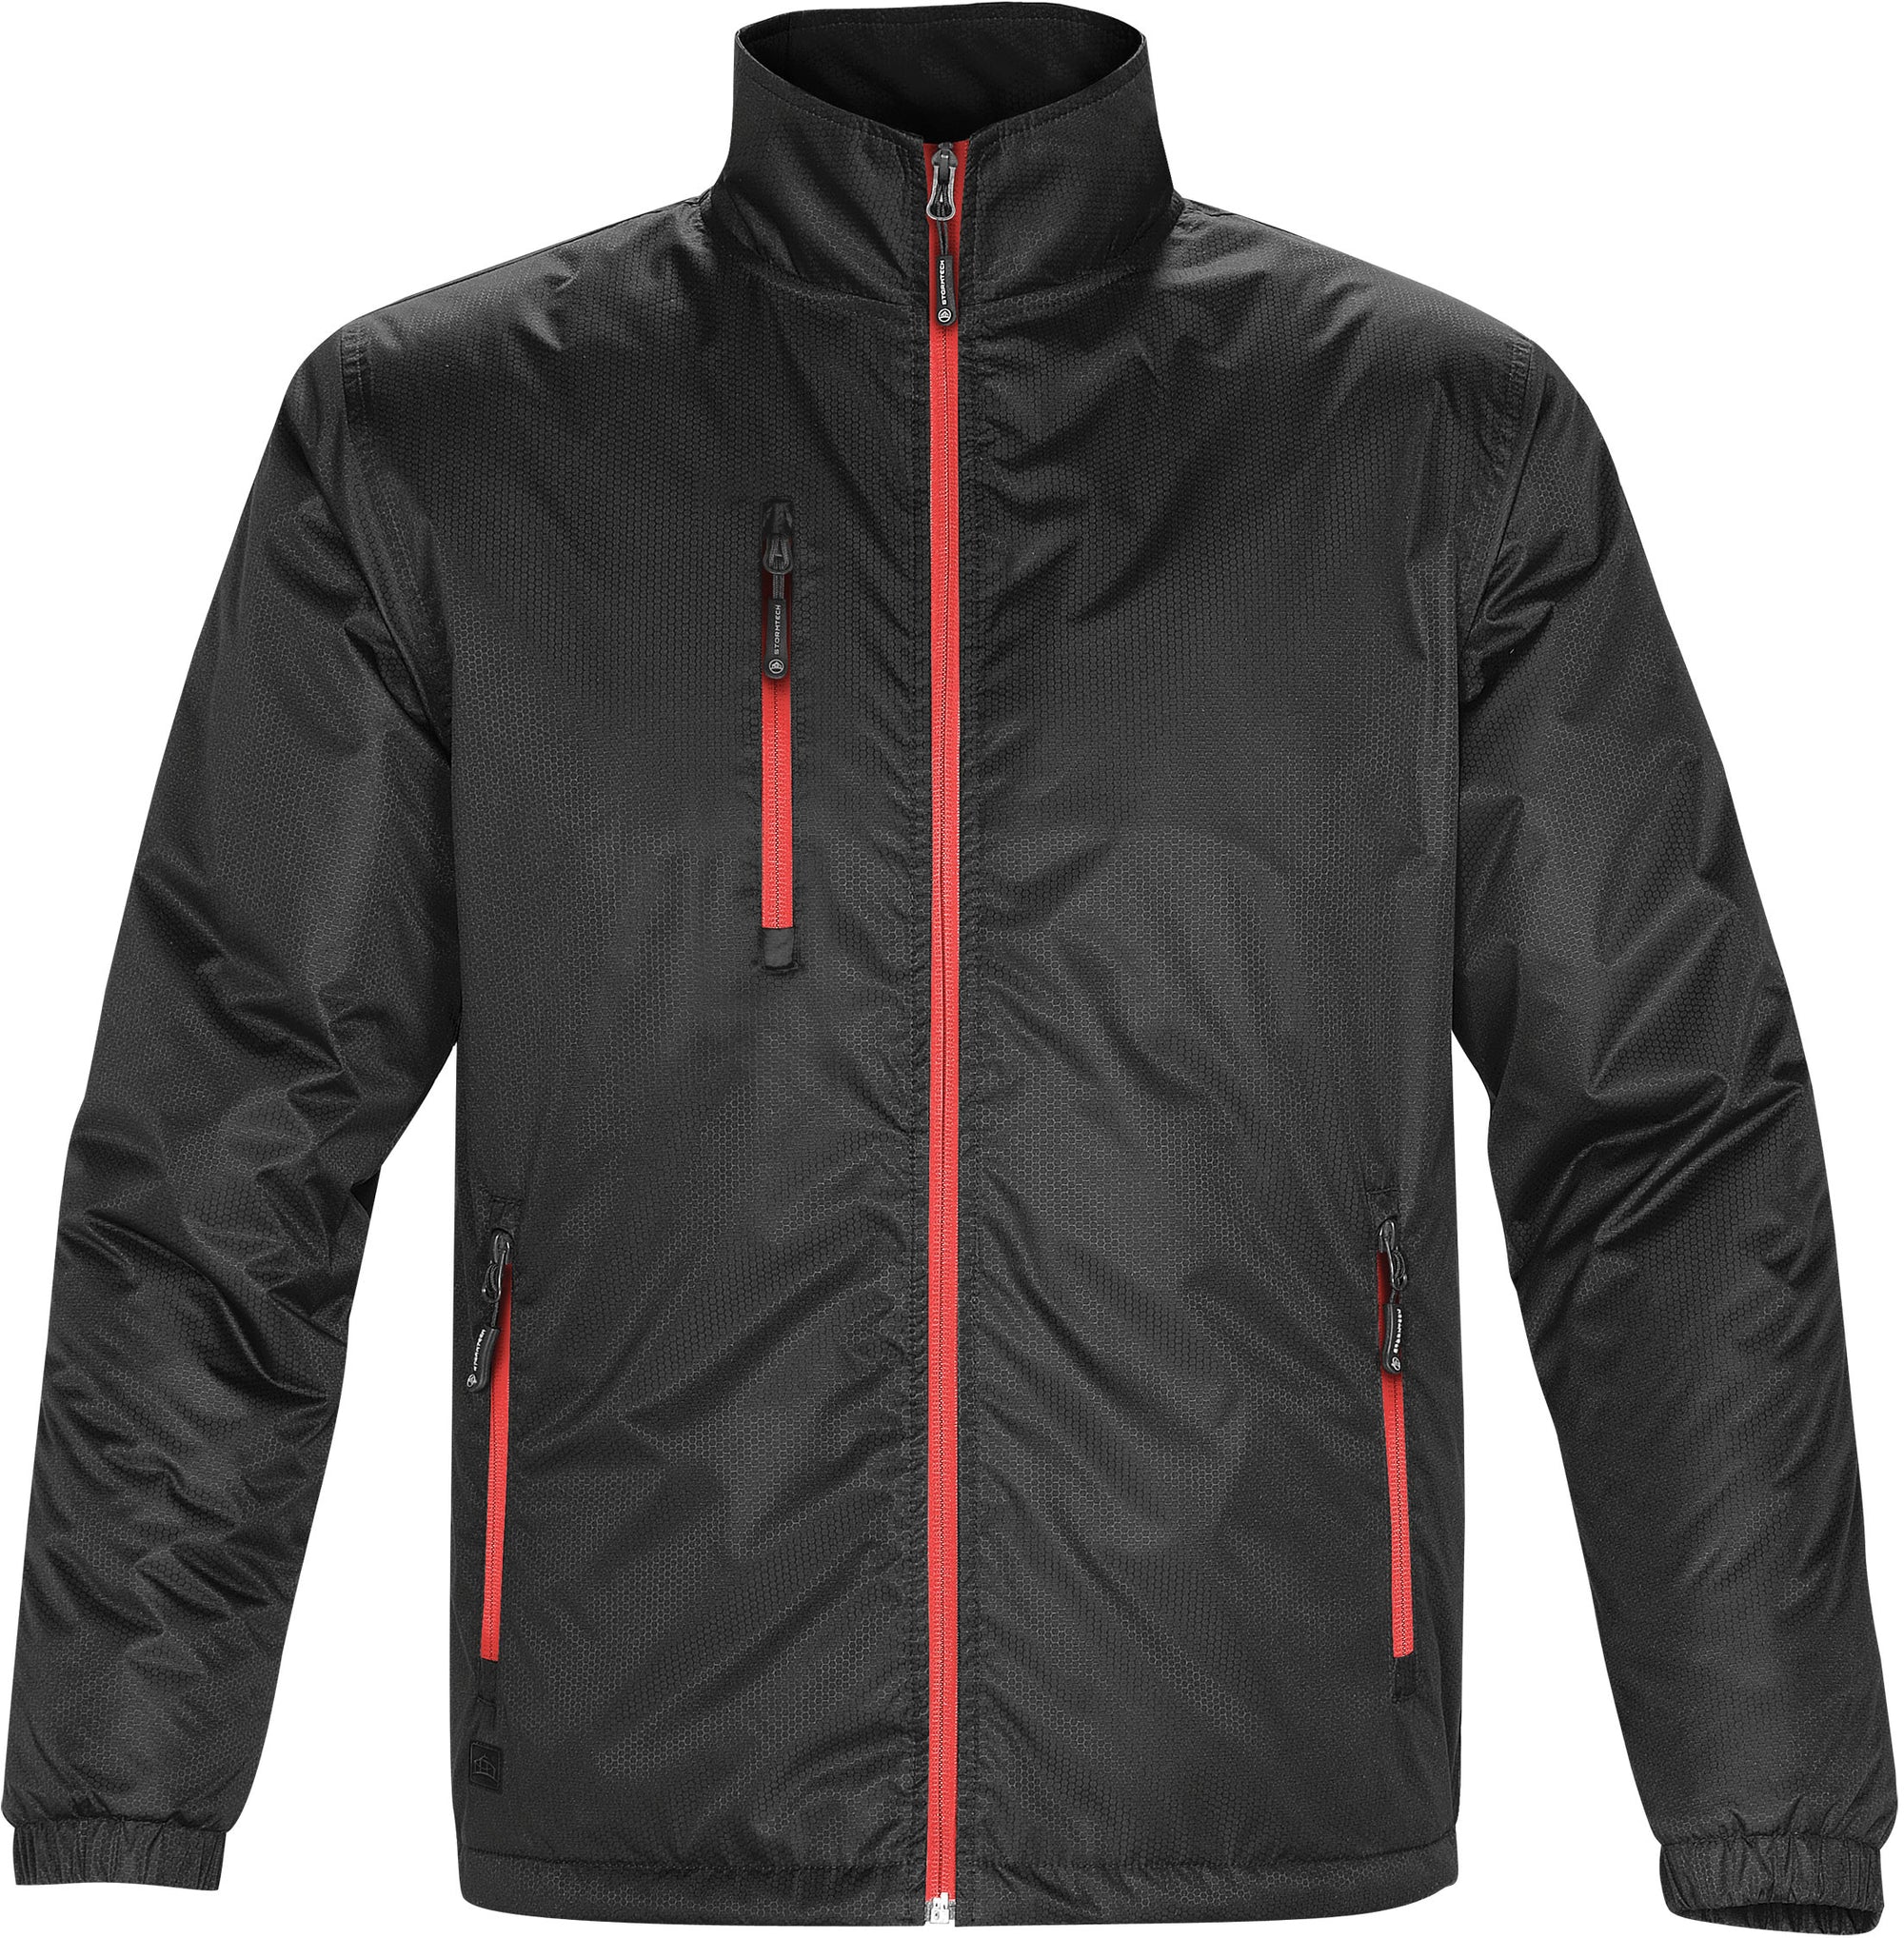 STORMTECH MEN'S AXIS THERMAL SHELL JACKET